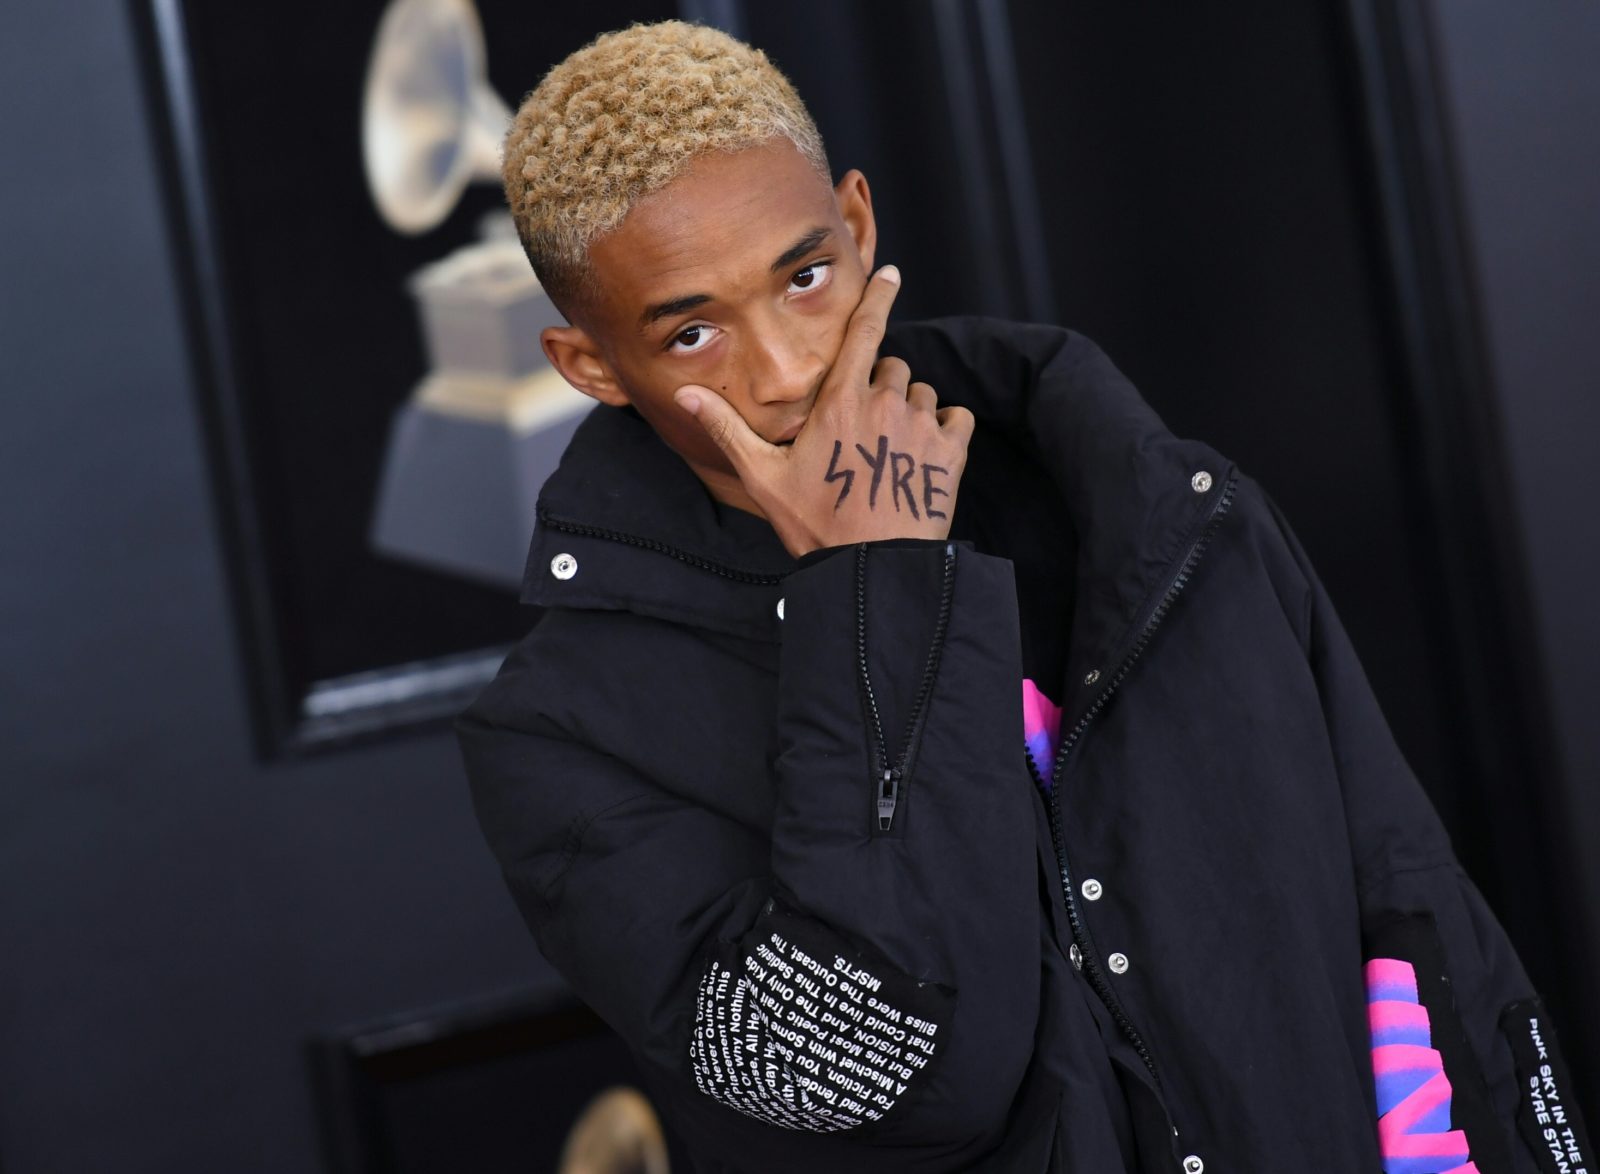 Jaden Smith challenges gender stereotypes by wearing a dress in